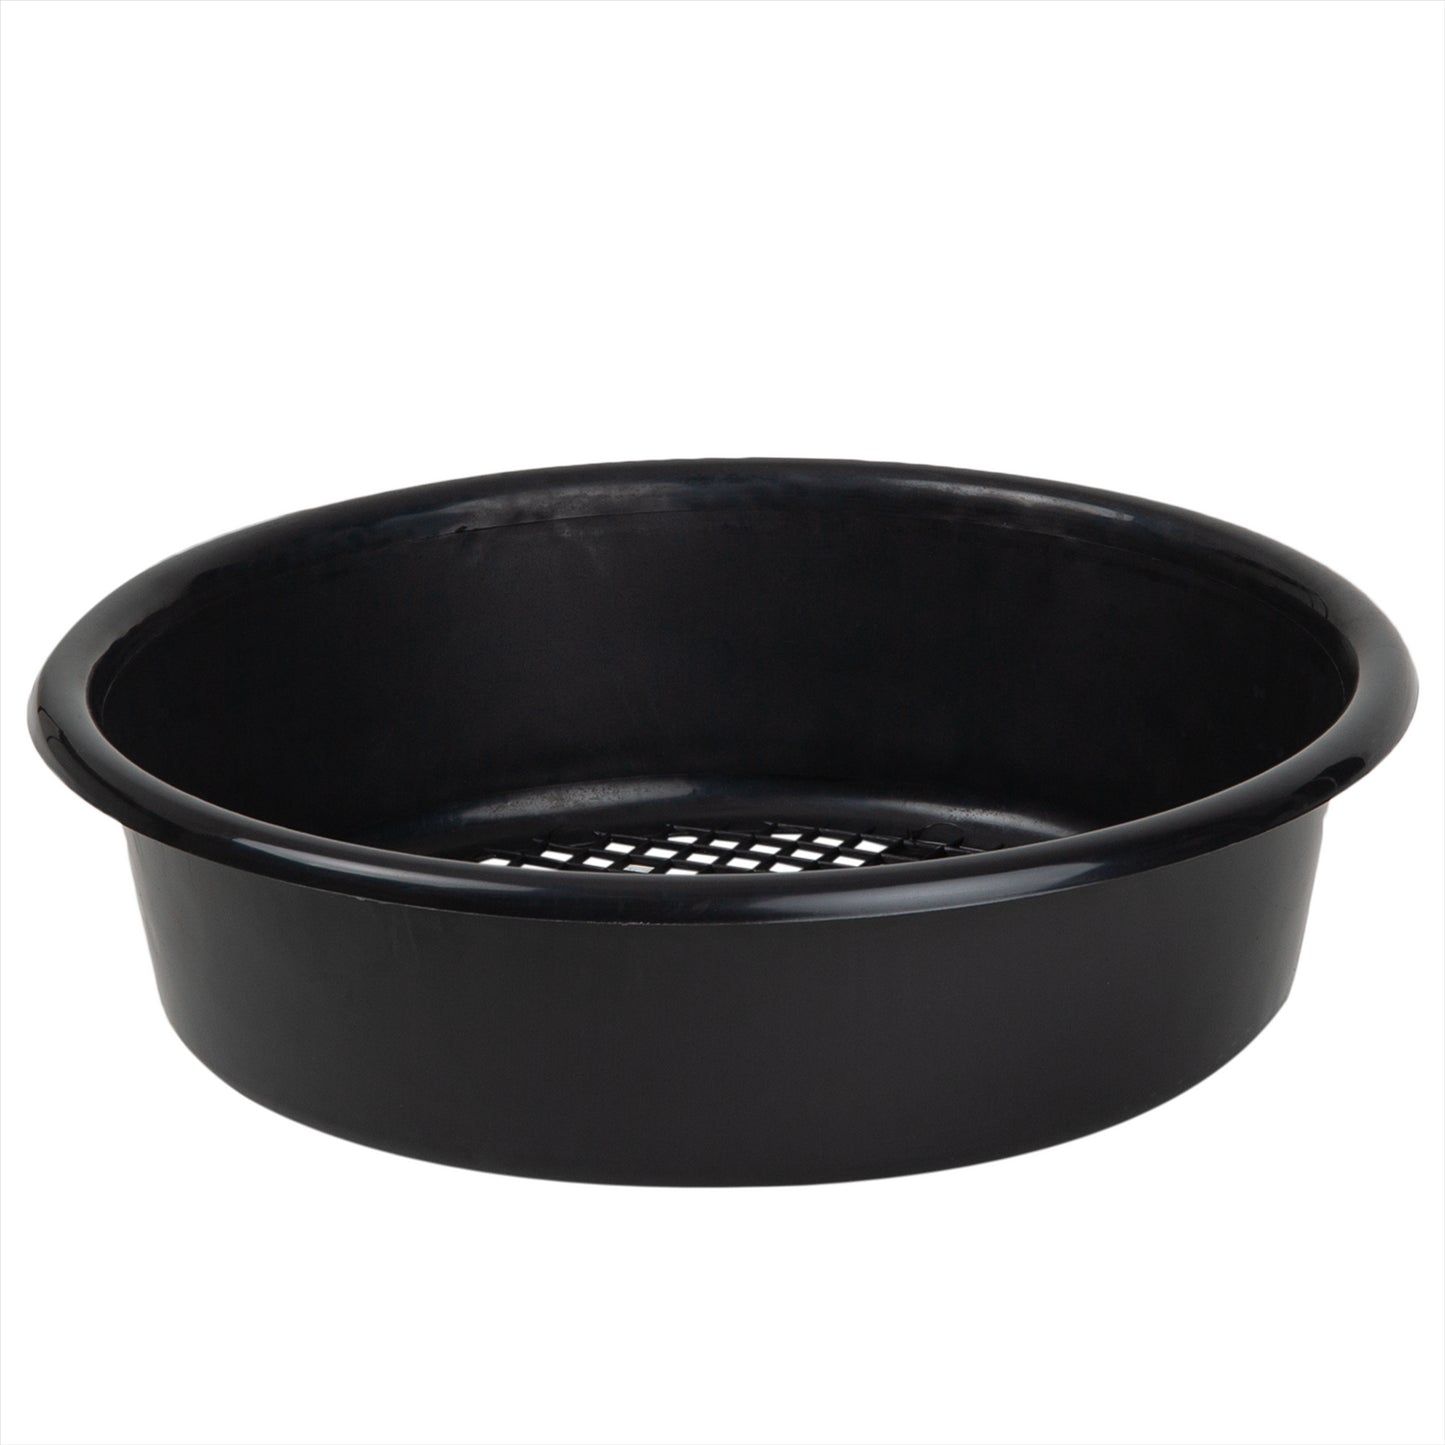 Heavy-Duty Plastic Sieve For Baking And Cooking